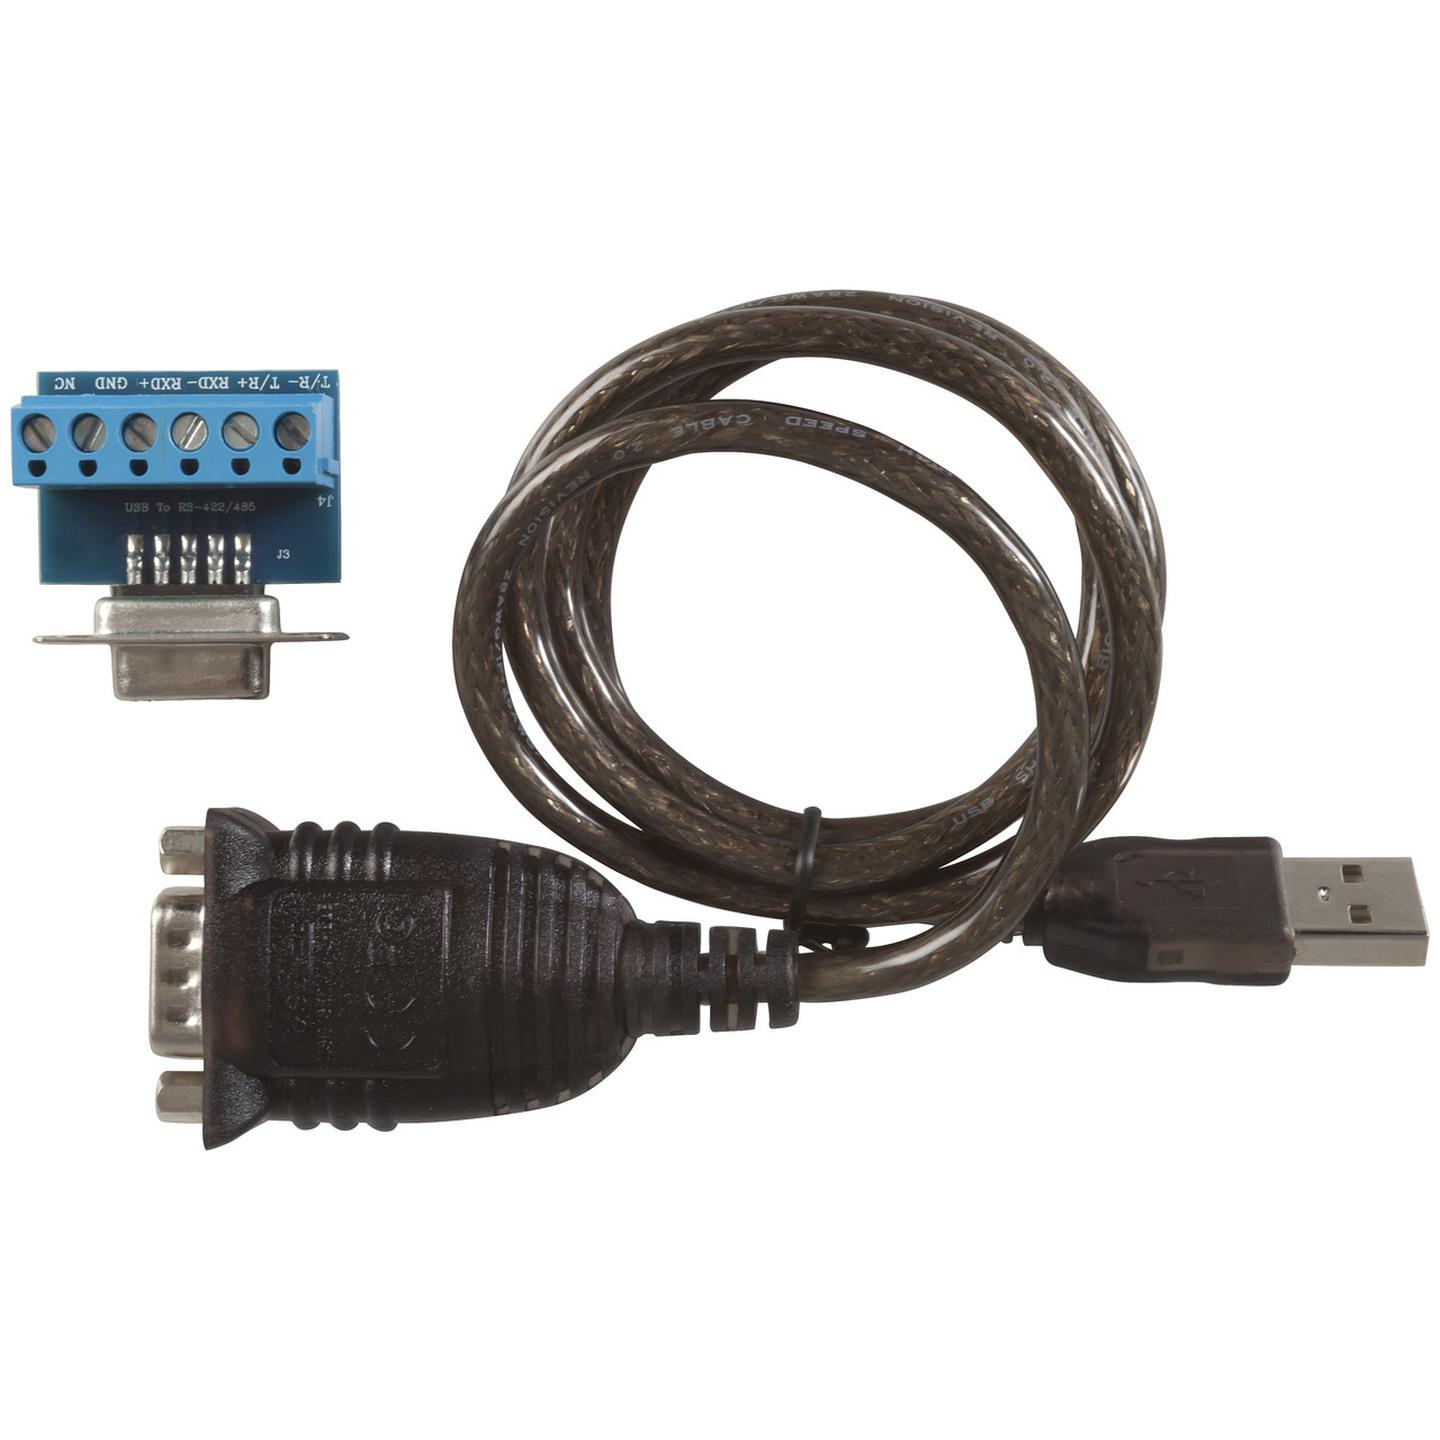 USB Port to RS-485/422 Converter with Automatic Detect Serial Signal Rate